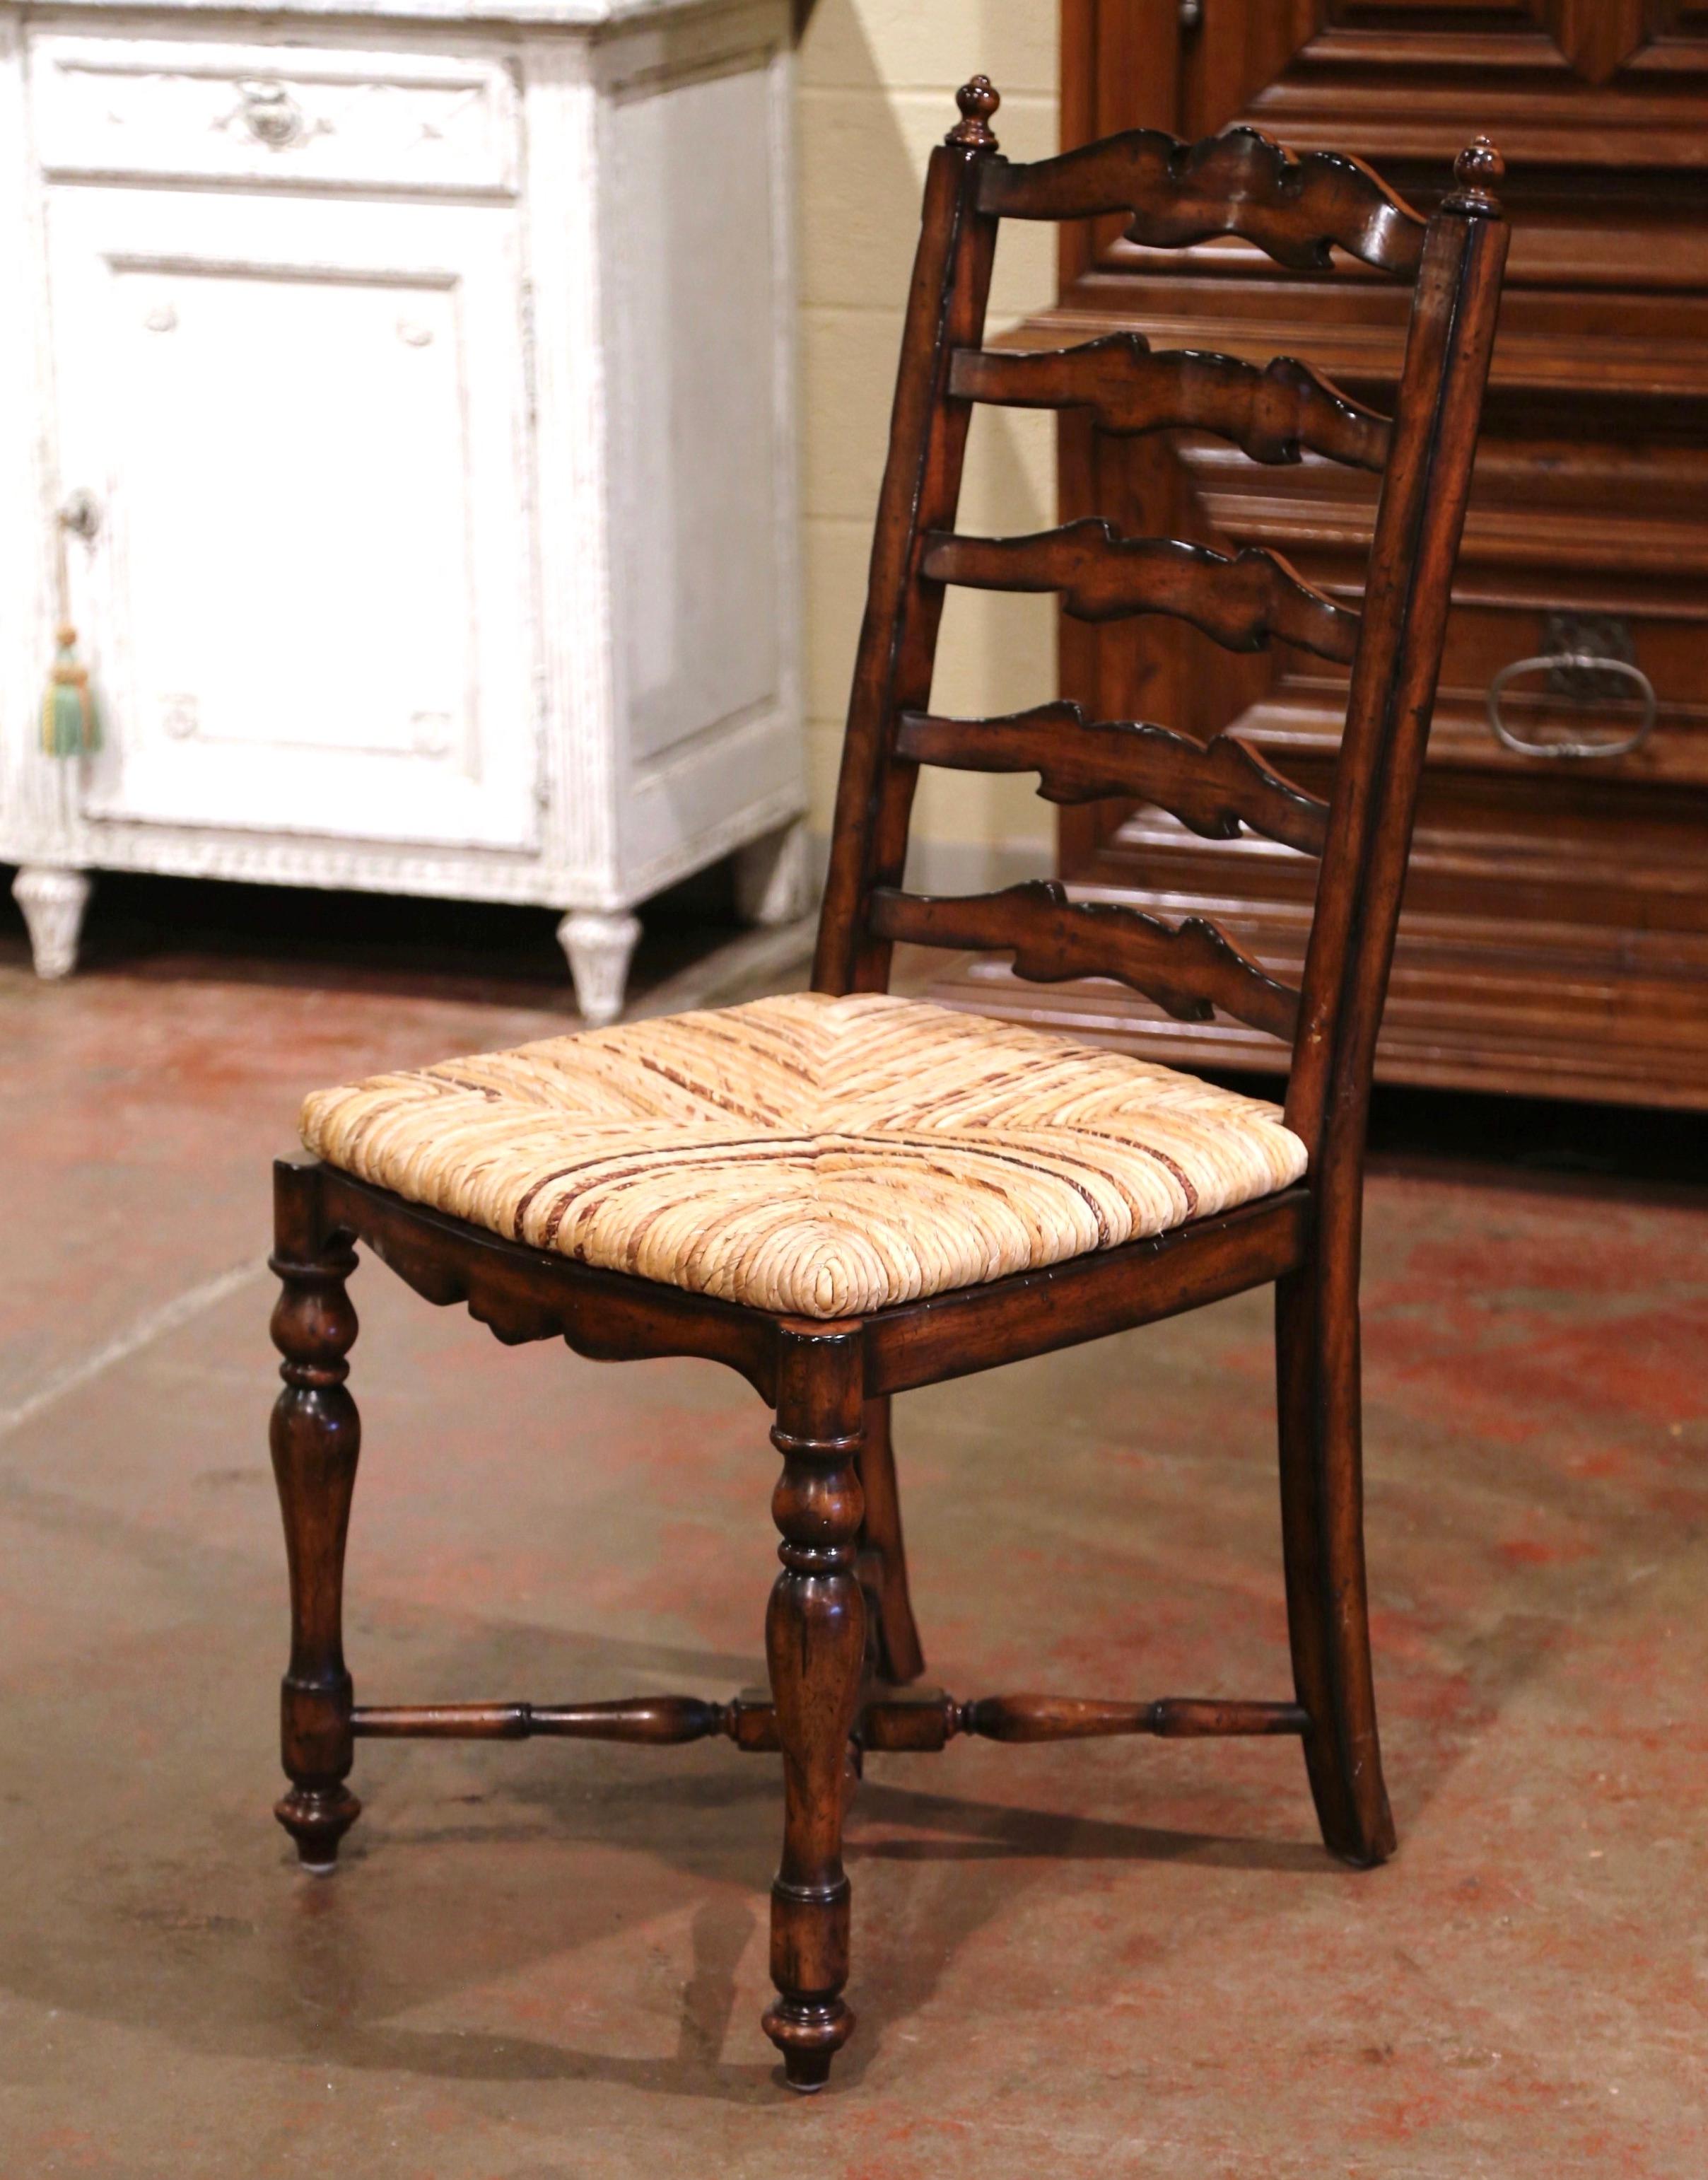 These six elegant country chairs were crafted in France, circa 2000. Carved from solid walnut, each large chair stands on turned front legs and curved back legs, all connected with a bottom 